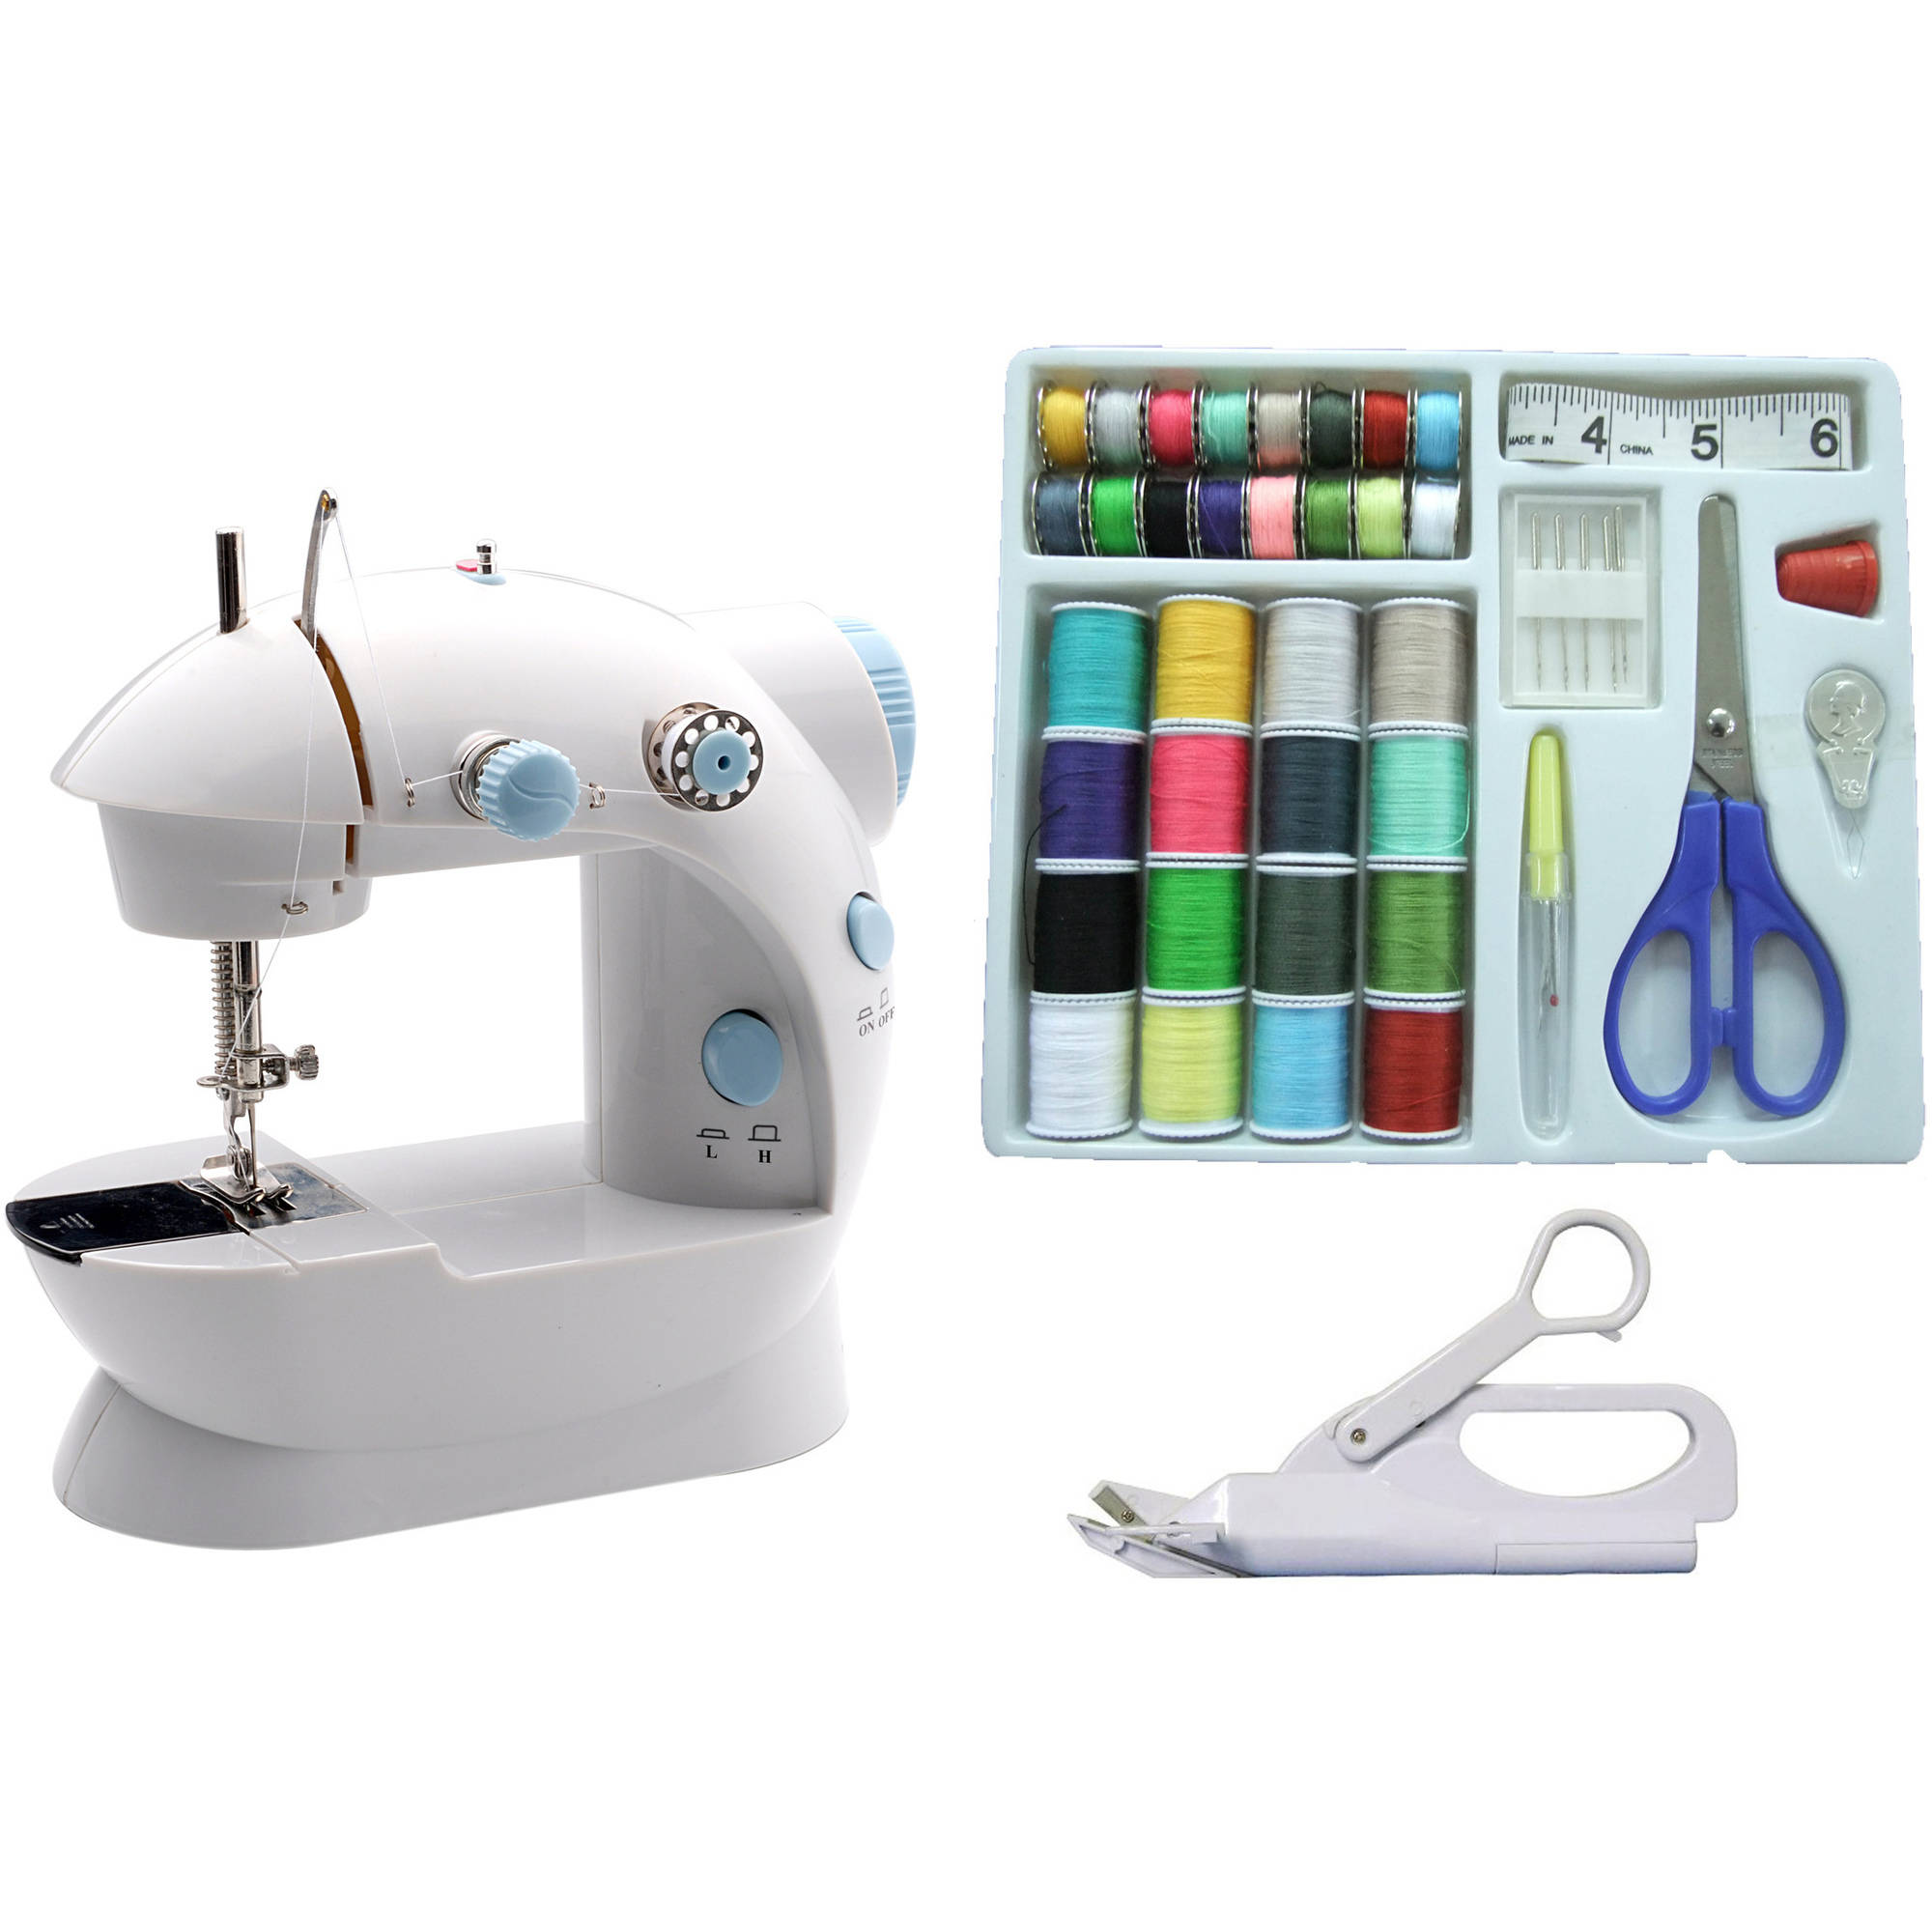 Michley Lss-202C Mini Portable Mechanical Sewing Machine & Accessories 3-Piece Value Bundle With Electric Scissors And Sewing Kit - image 1 of 13